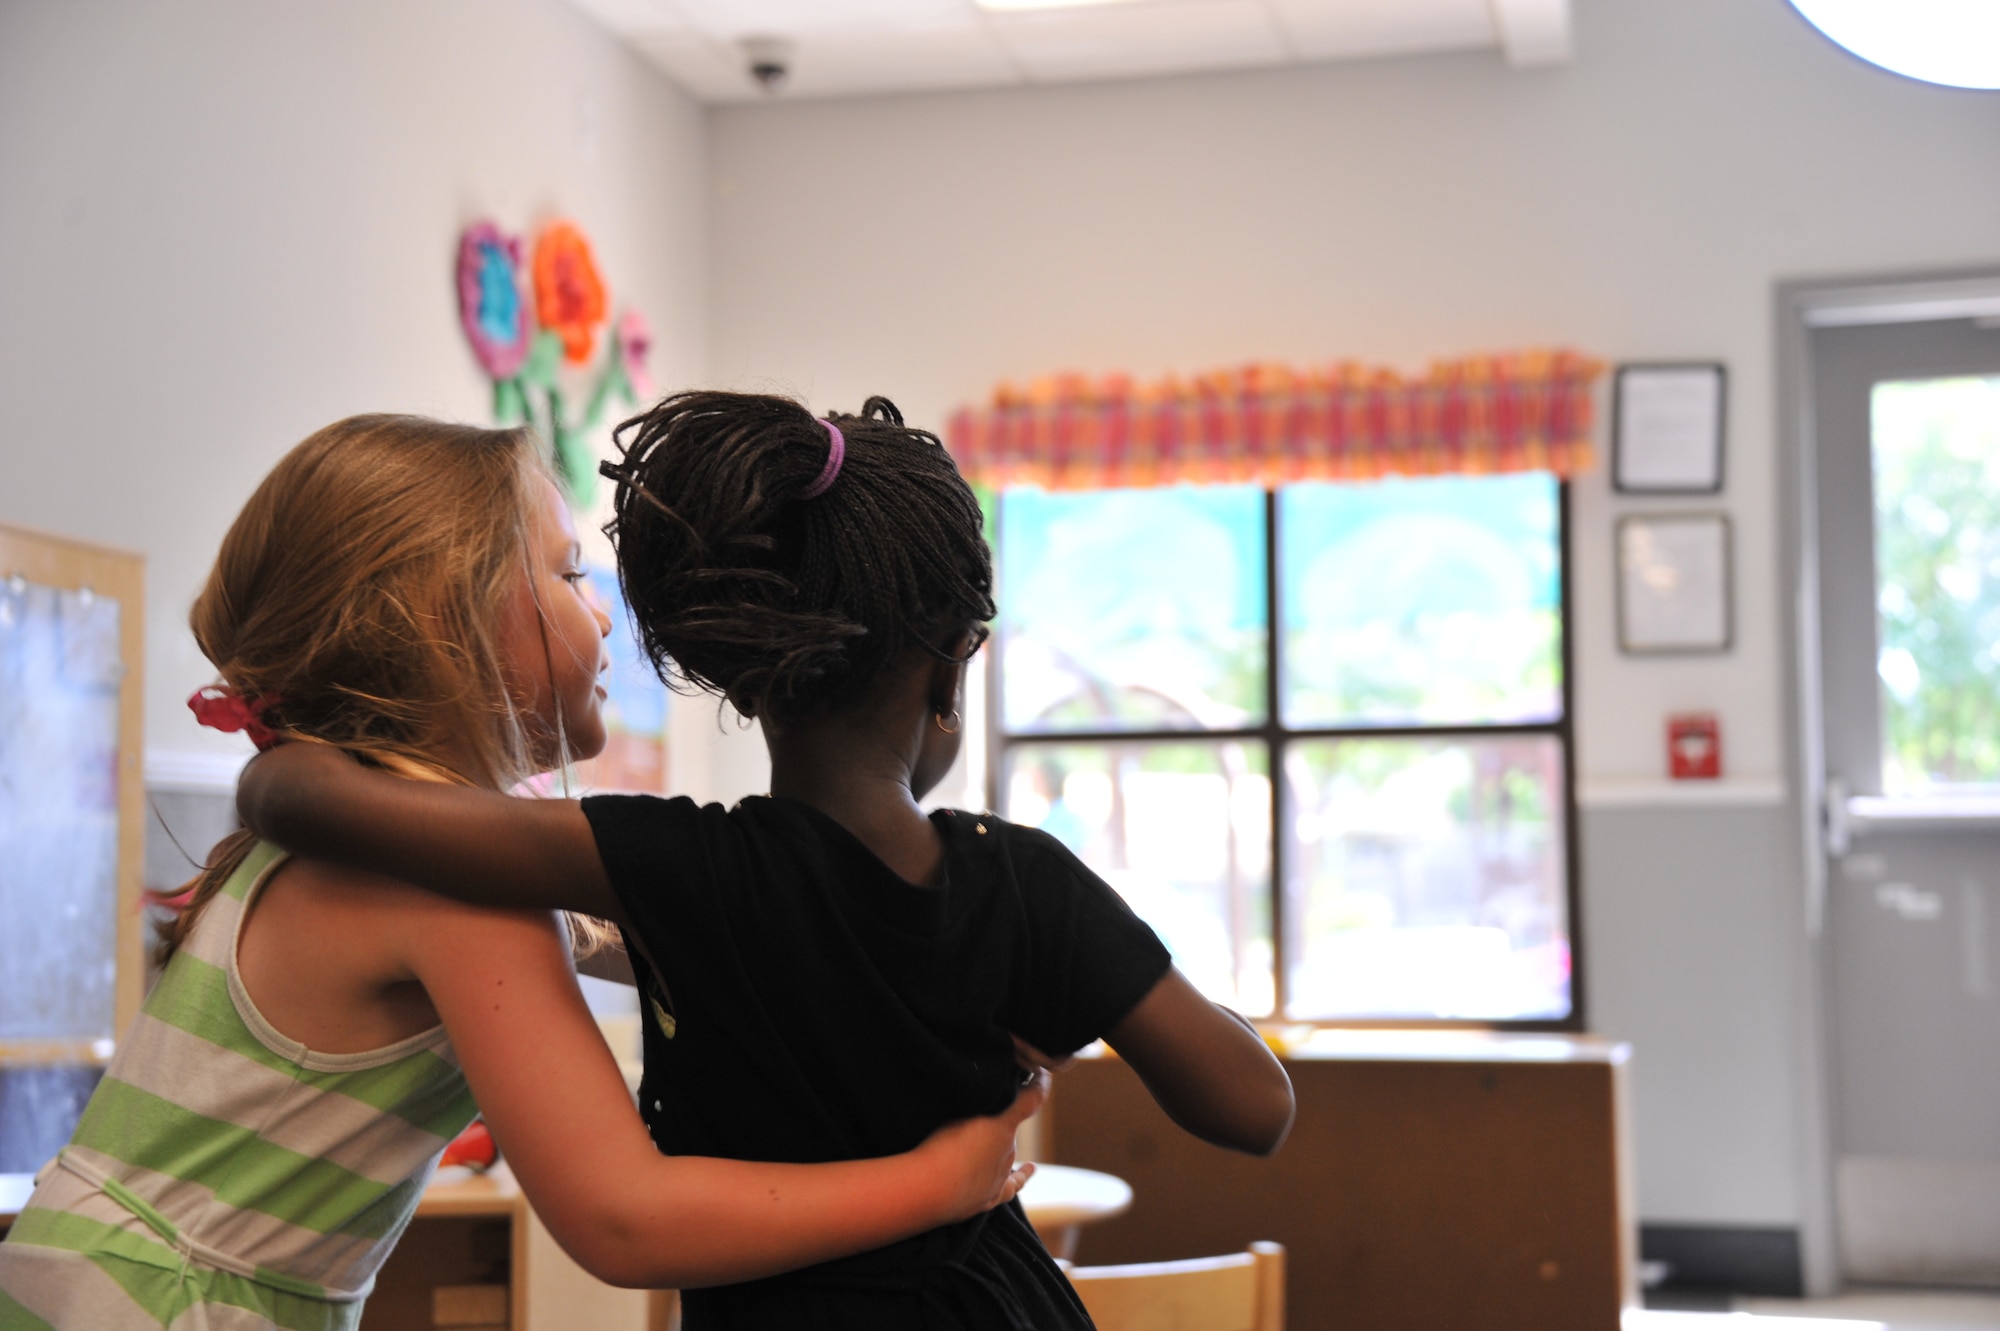 Sarah Caton, left, hugs her best friend Fatou Gueye May 20, 2014, at the Maxwell Air Force Base child development center, Ala. Both girls are 4-year-old students at the center. When Fatou, who is from Senegal, first arrived to the CDC she did not speak English, and was unfamiliar with American customs. Thanks to Sarah, Fatou is now fluent in English and has adjusted to American practices. Many foreign students attend the Maxwell CDC as their parents go through officer schools at the Air University. (U.S. Air Force photo/Staff Sgt. Natasha Stannard)